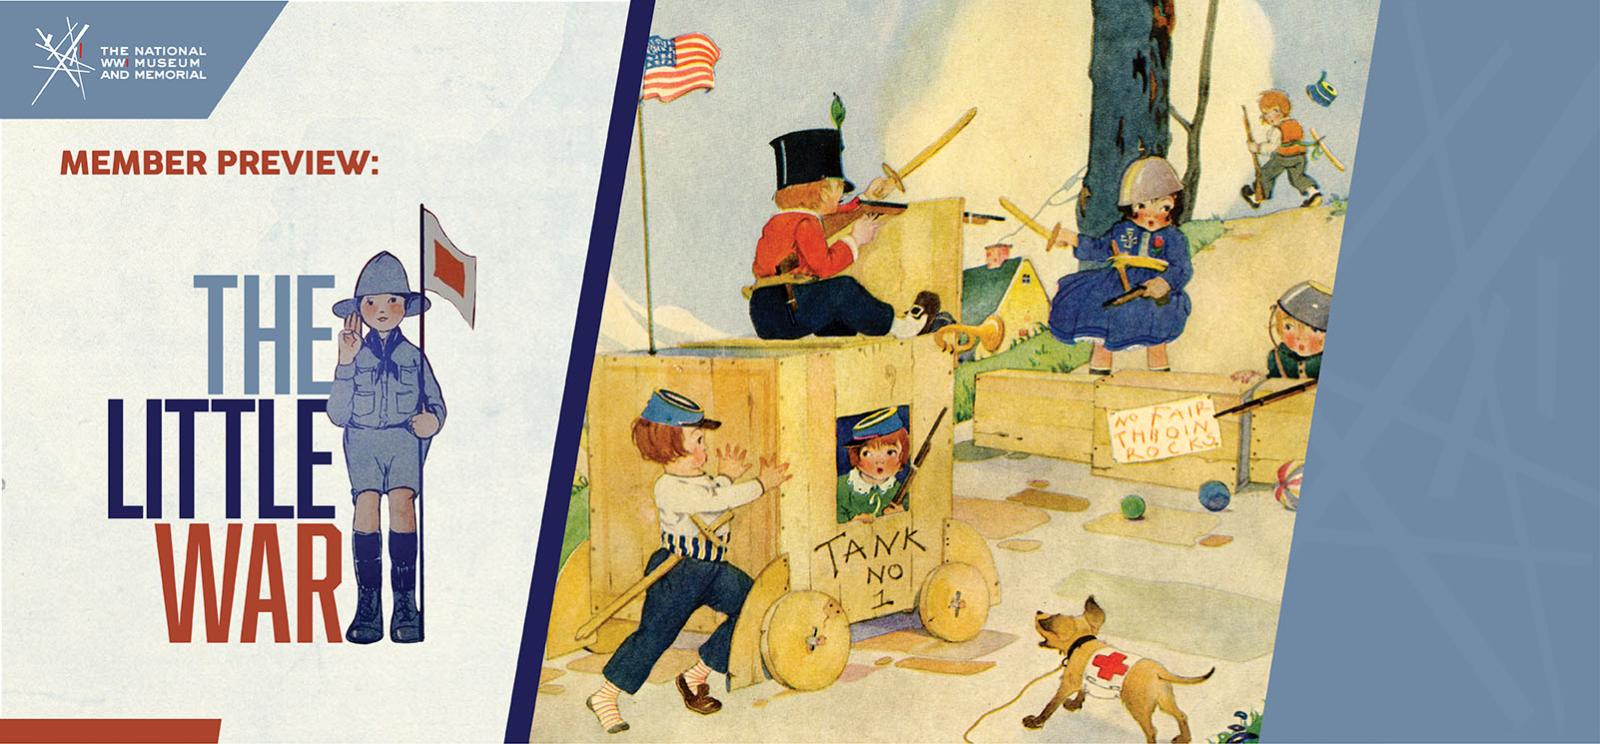 Image: Illustration of children playing at being soldiers with cardboard tanks and toy swords. Text: 'Member Preview / The Little War'